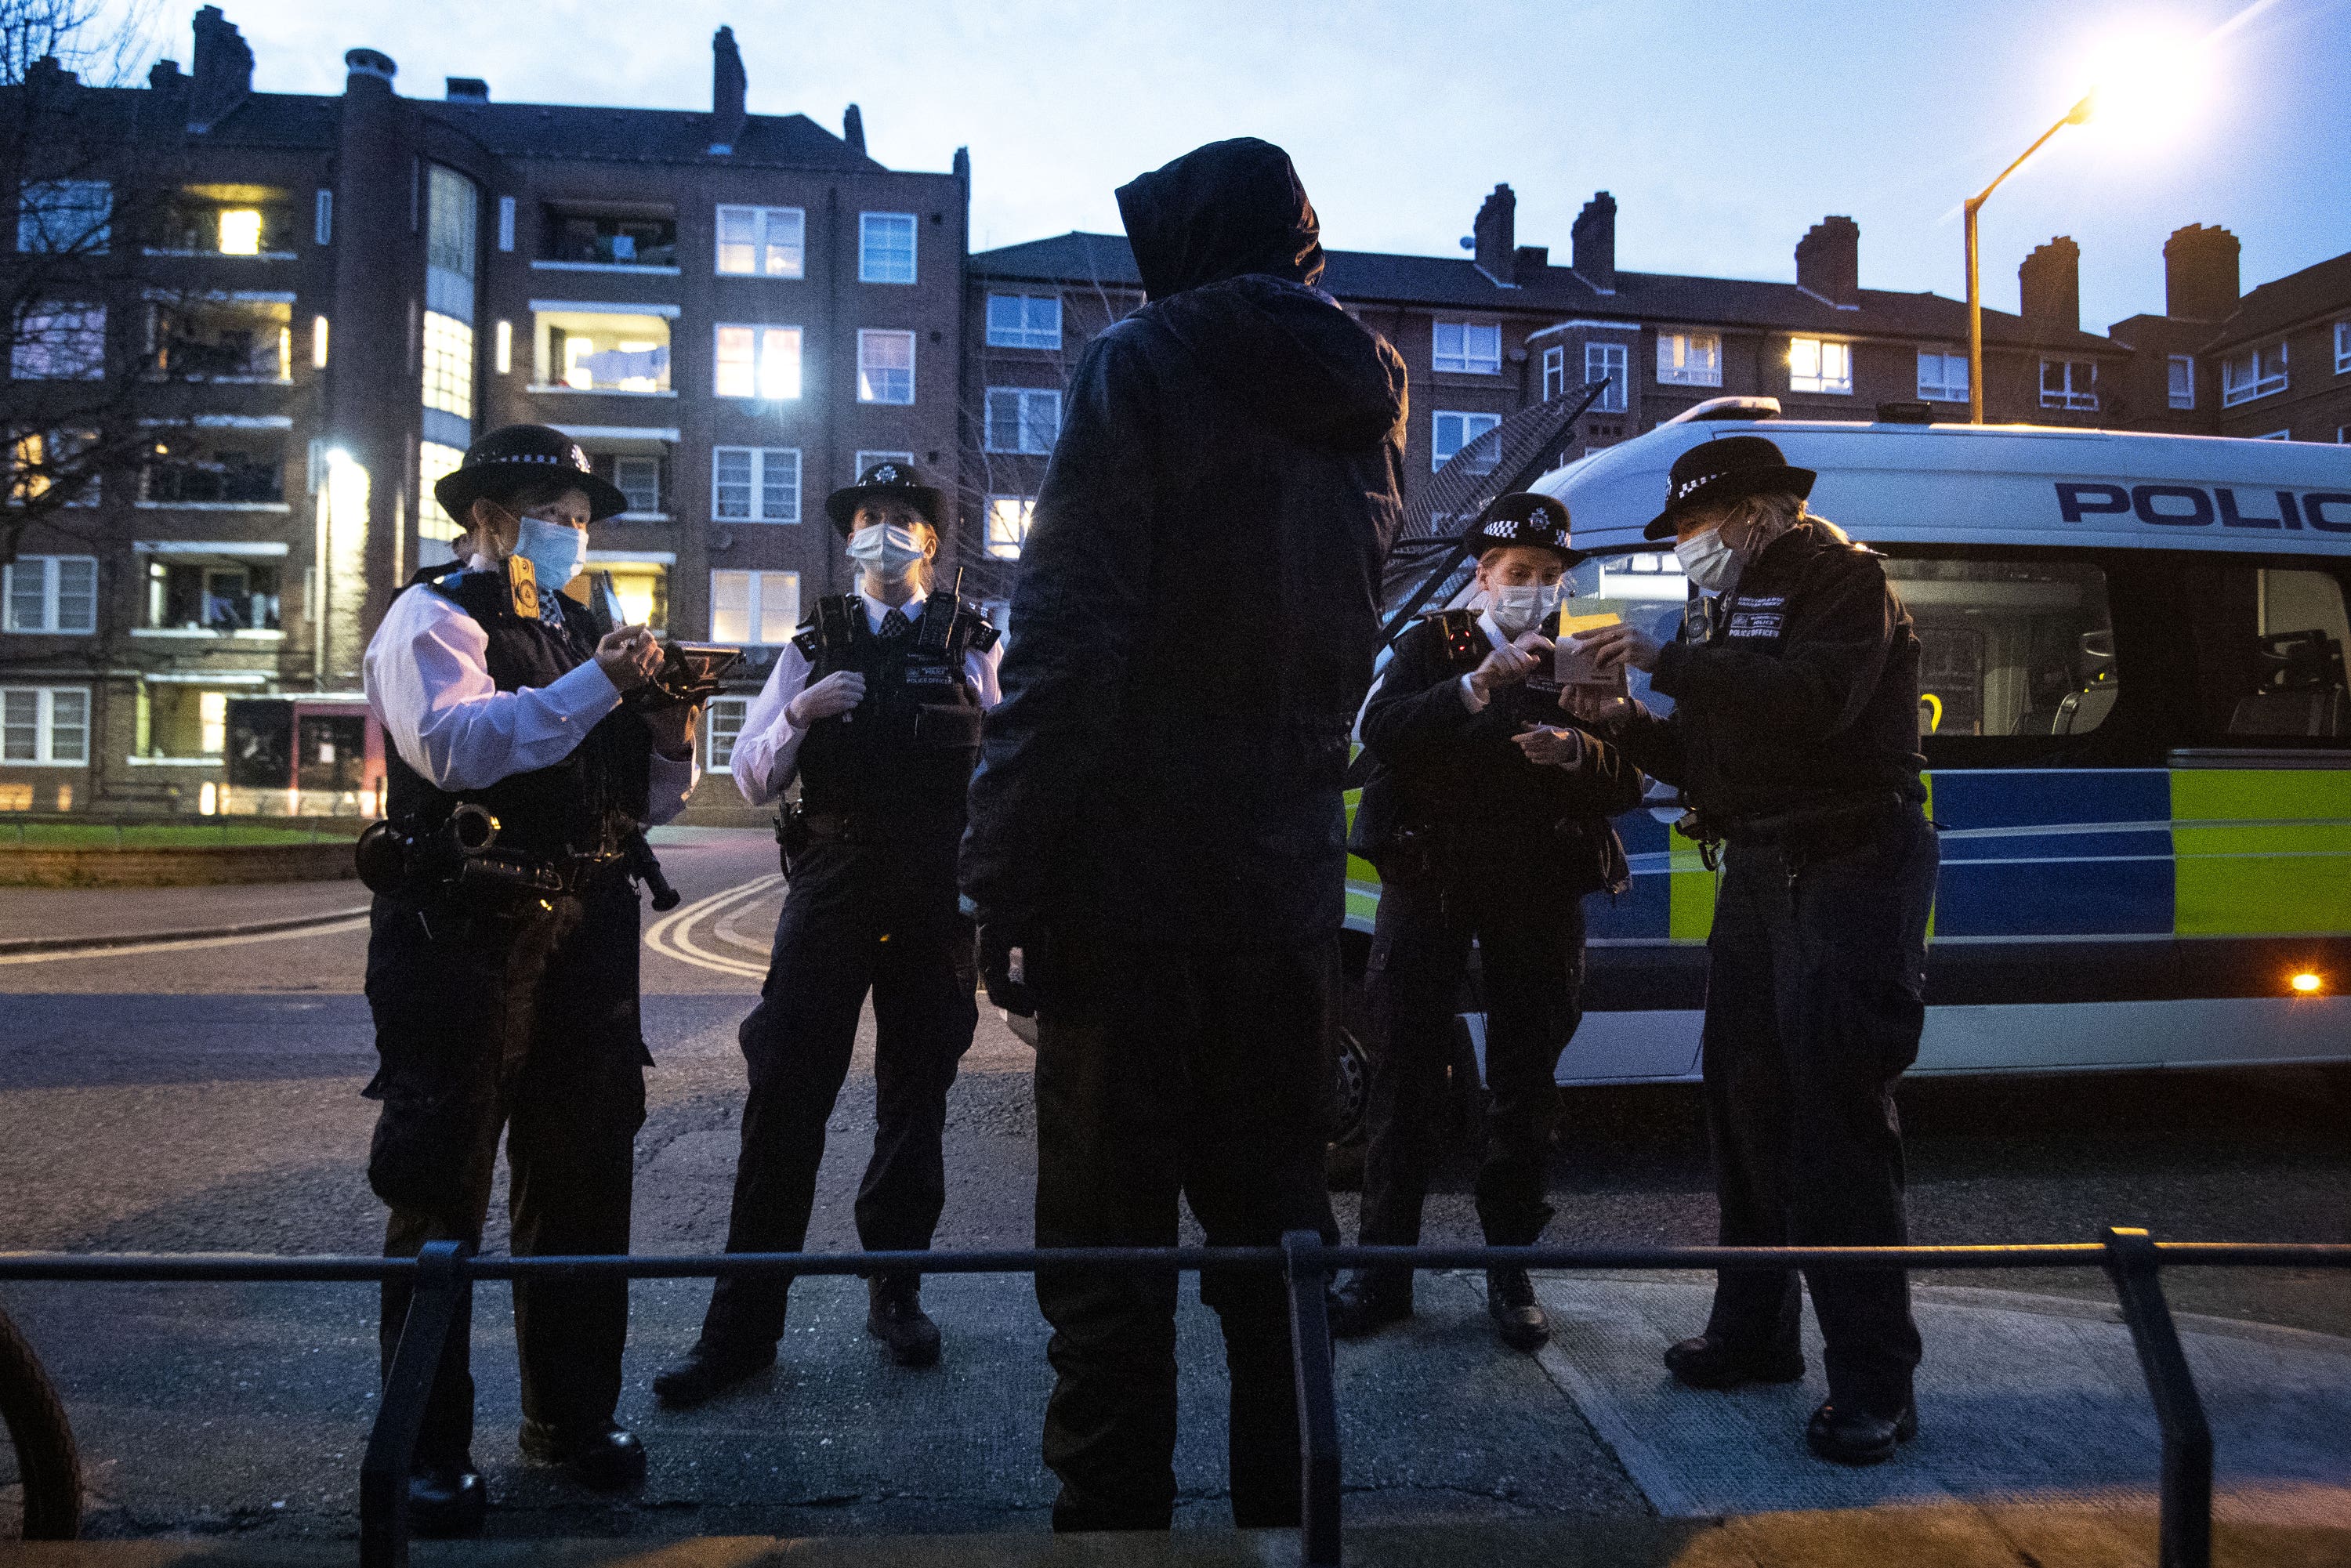 The Met is the UK’s largest police force